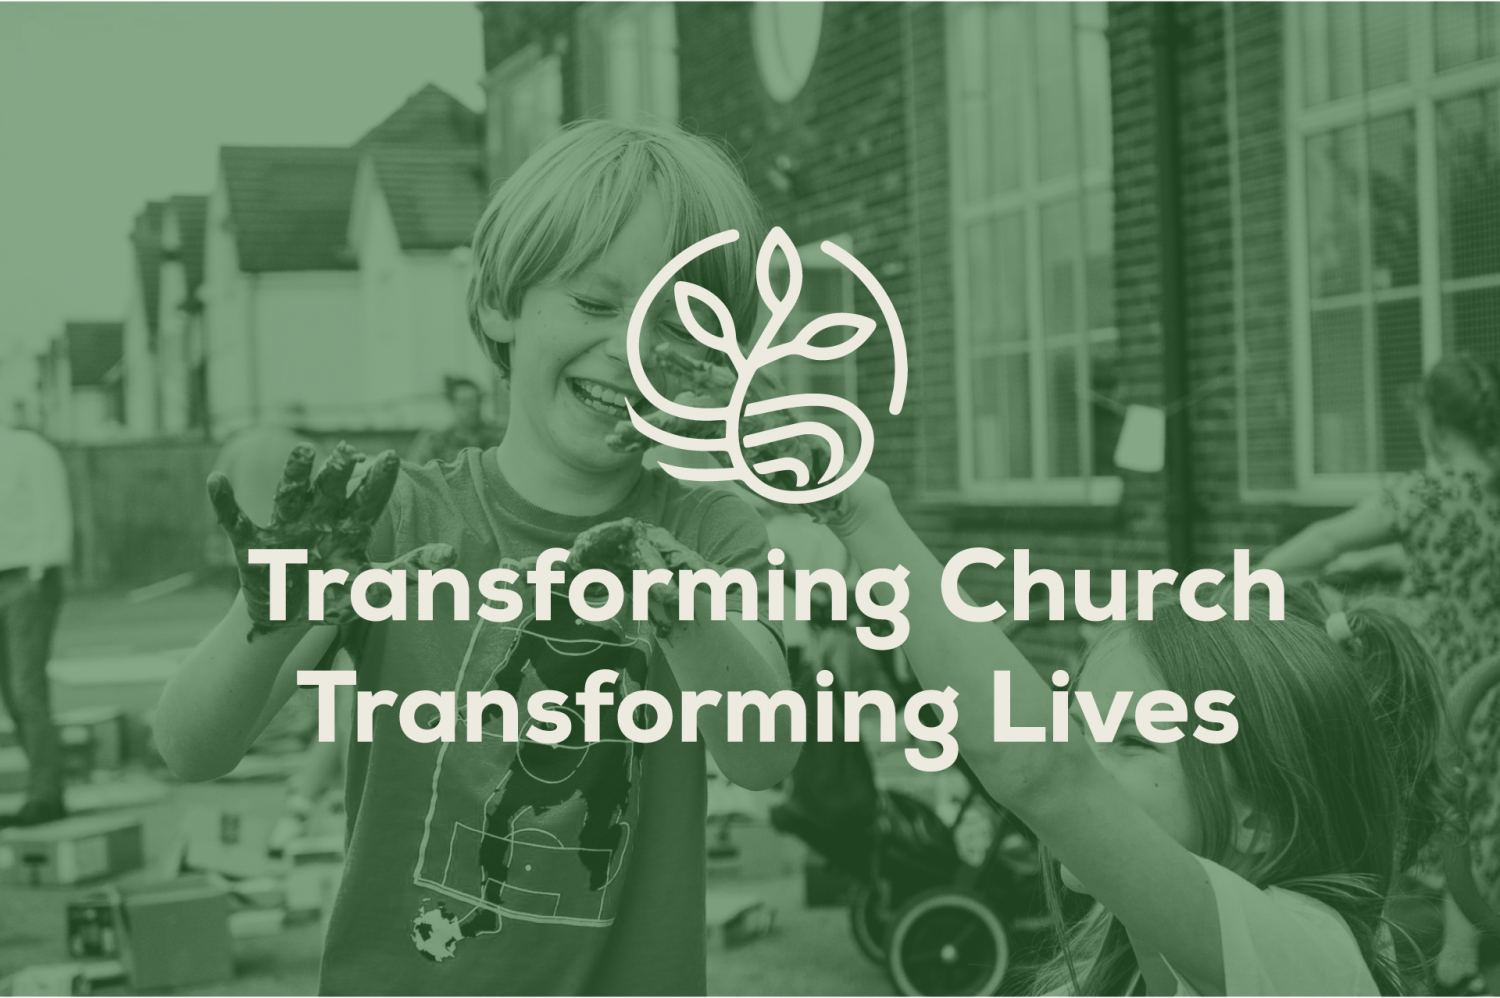 Transforming Church Transforming Lives logo on green background with smiling children